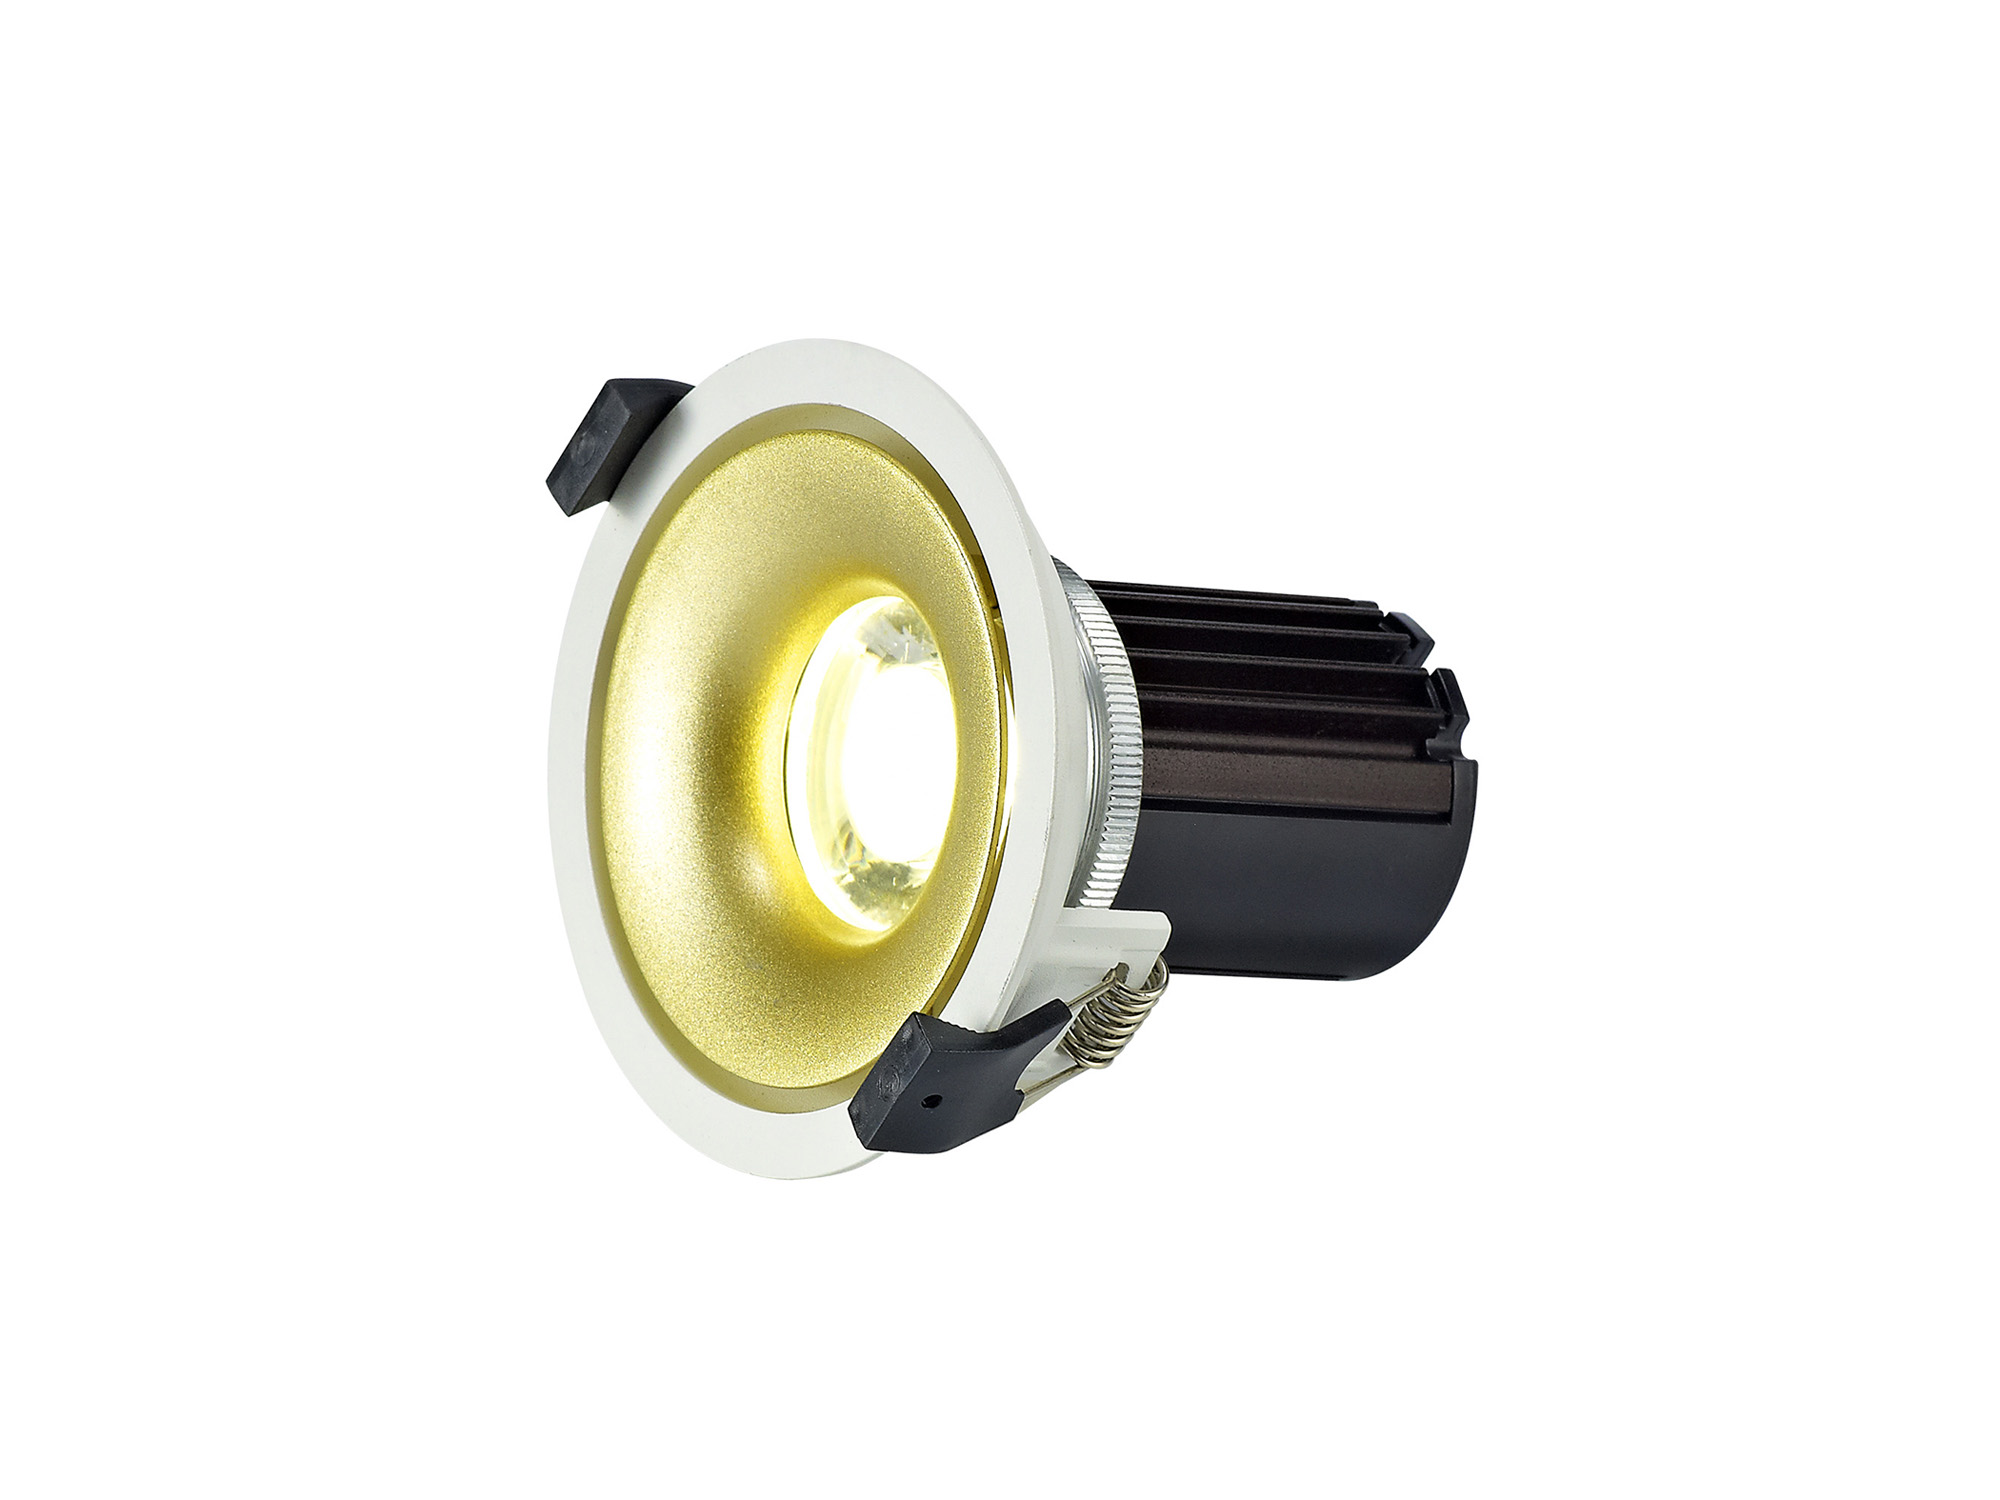 DM201033  Bolor 10 Tridonic Powered 10W 4000K 810lm 36° CRI>90 LED Engine White/Gold Fixed Recessed Spotlight, IP20